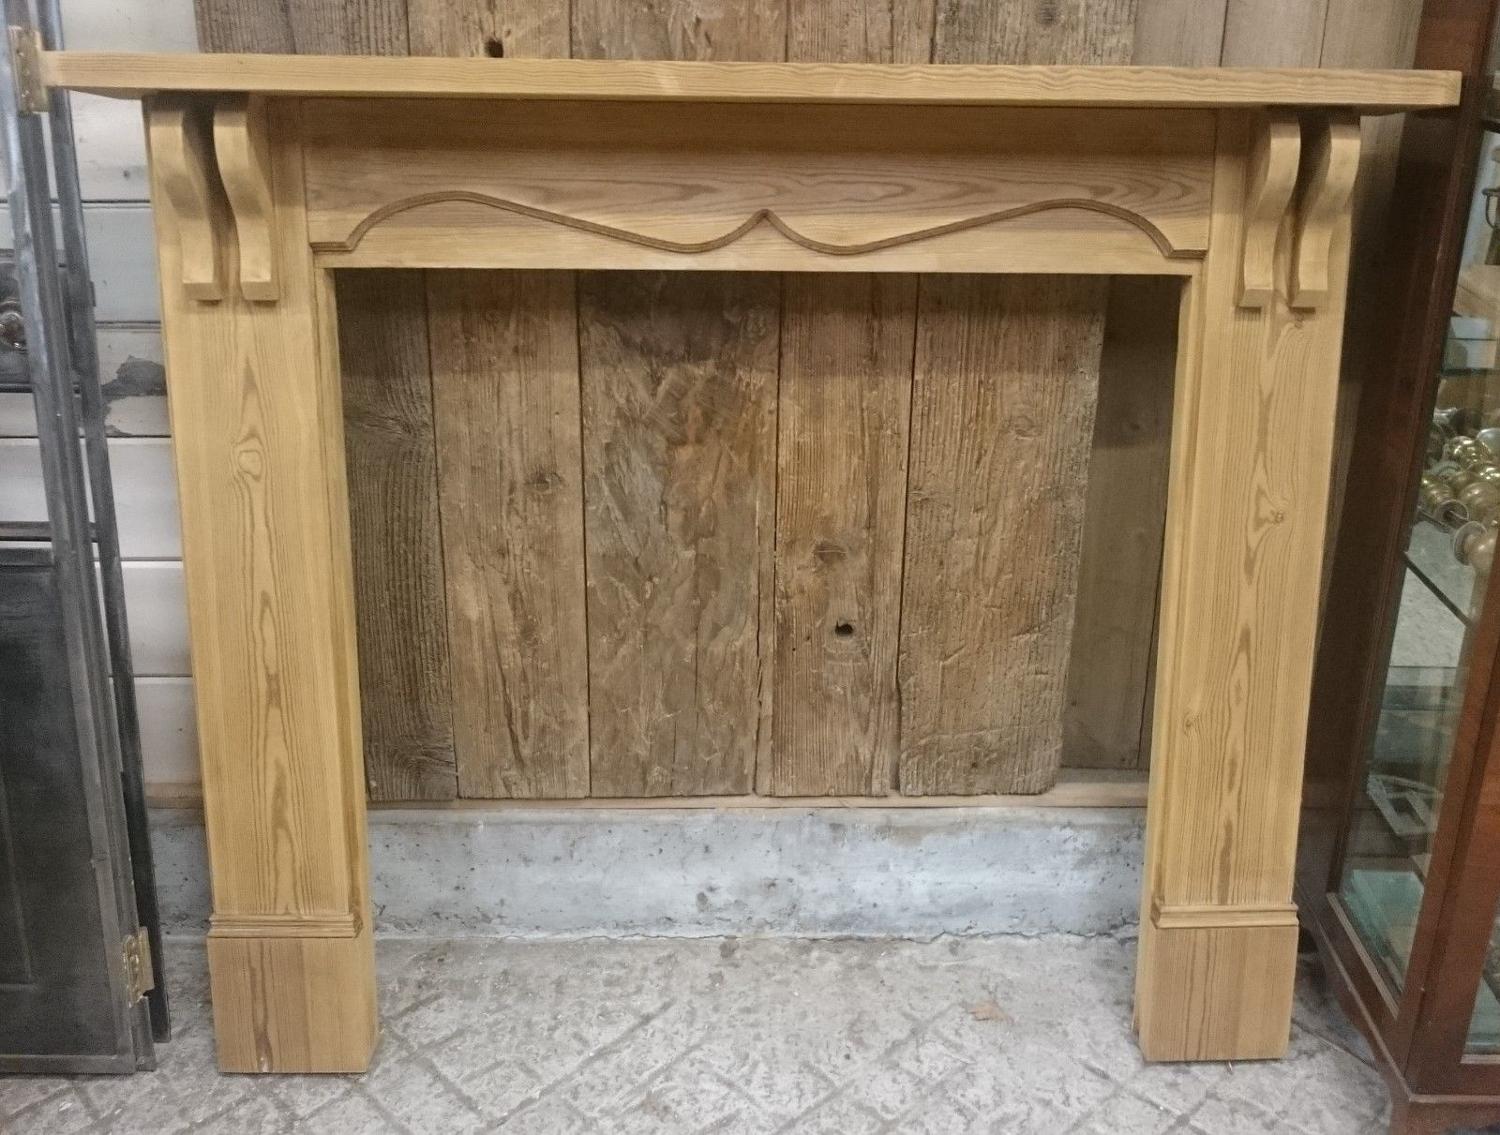 A reclaimed pine fire surround with Edwardian style design